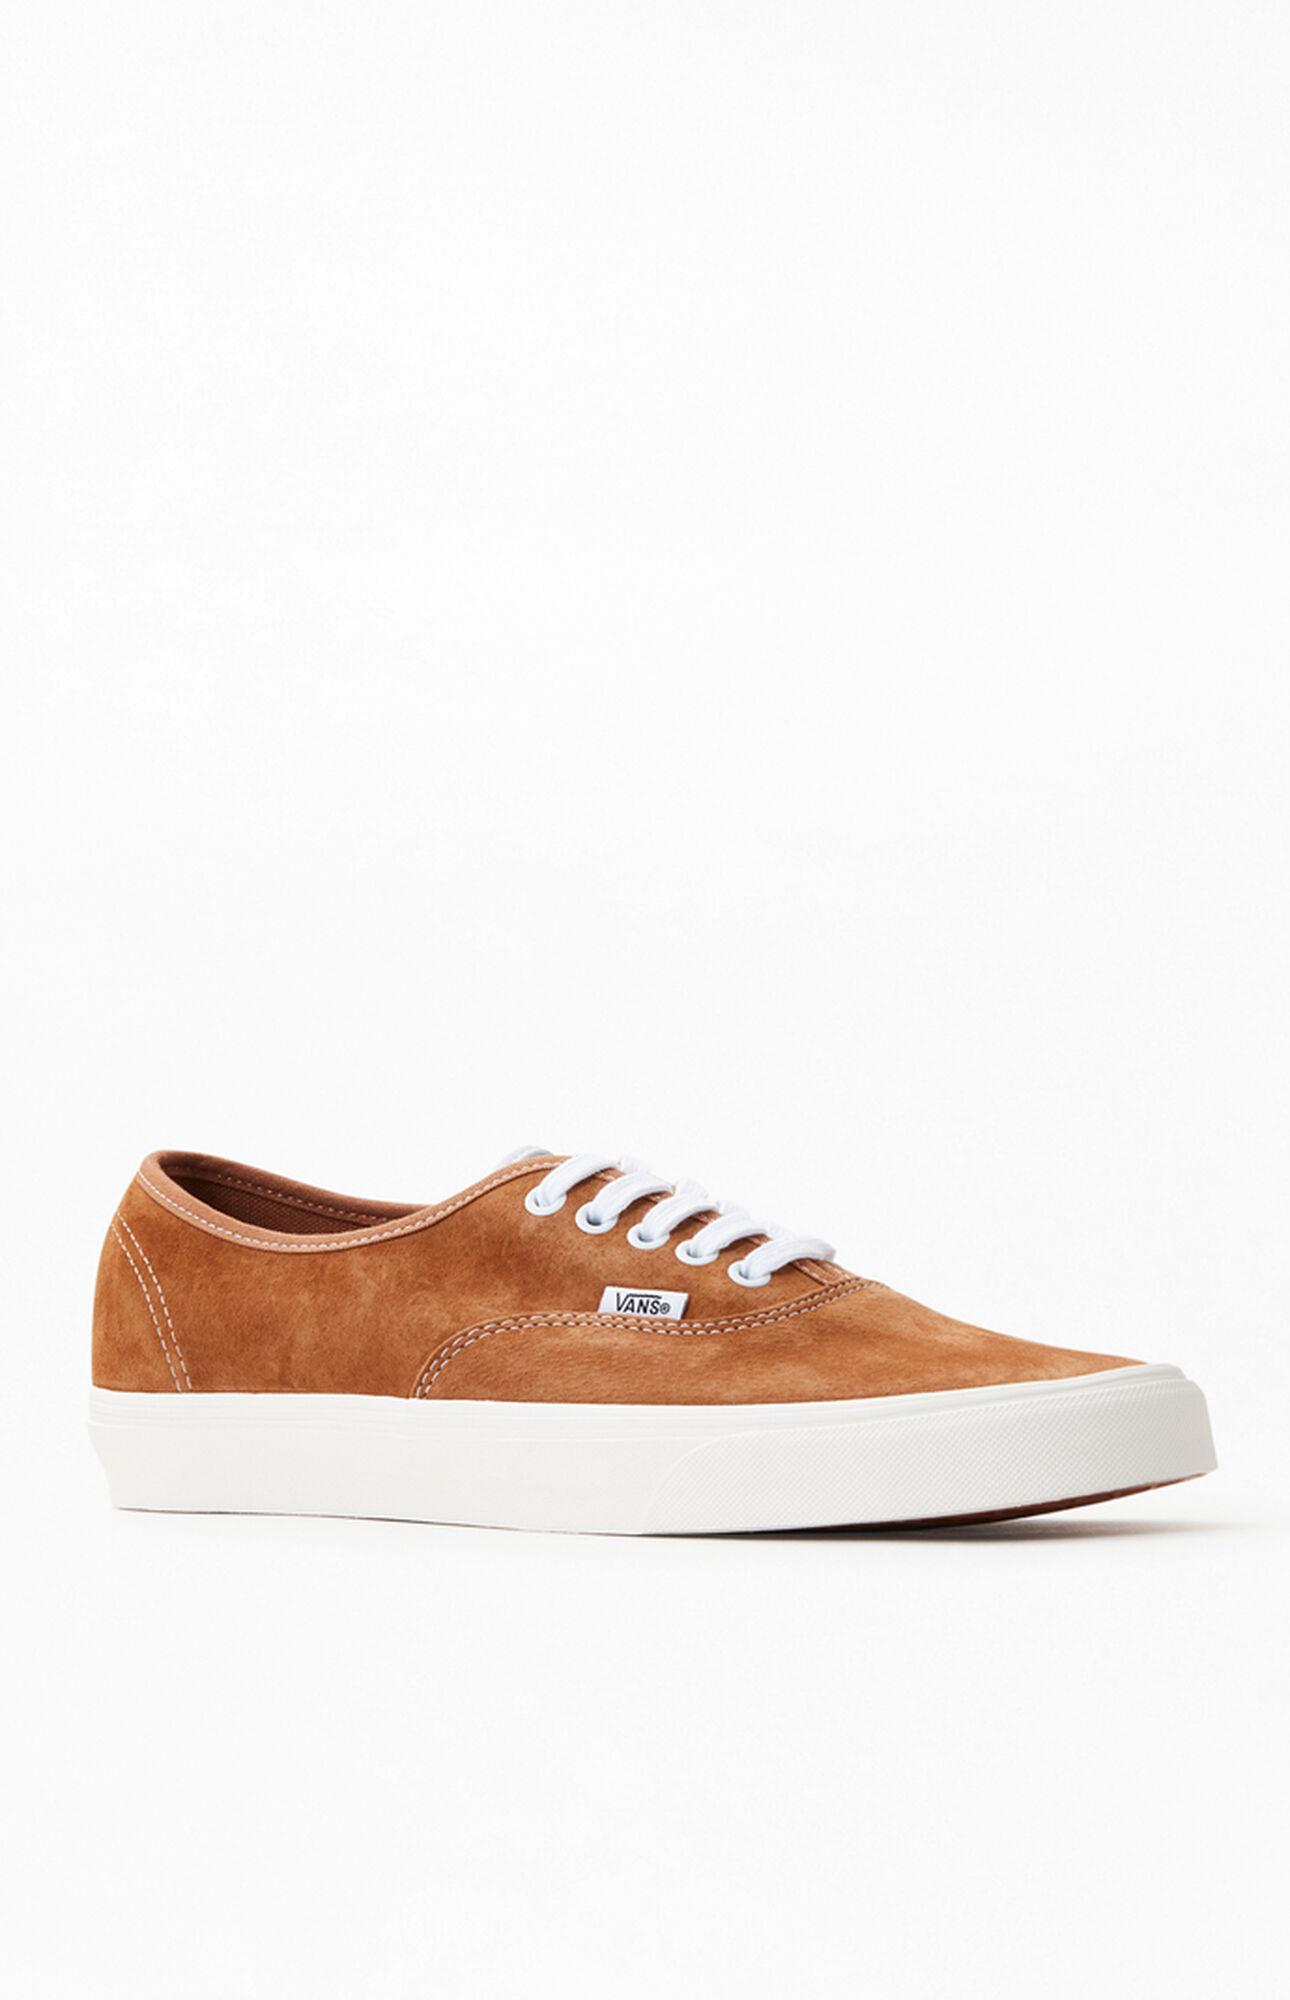 Vans Suede Authentic Shoes in Light Brown (Brown) for Men -